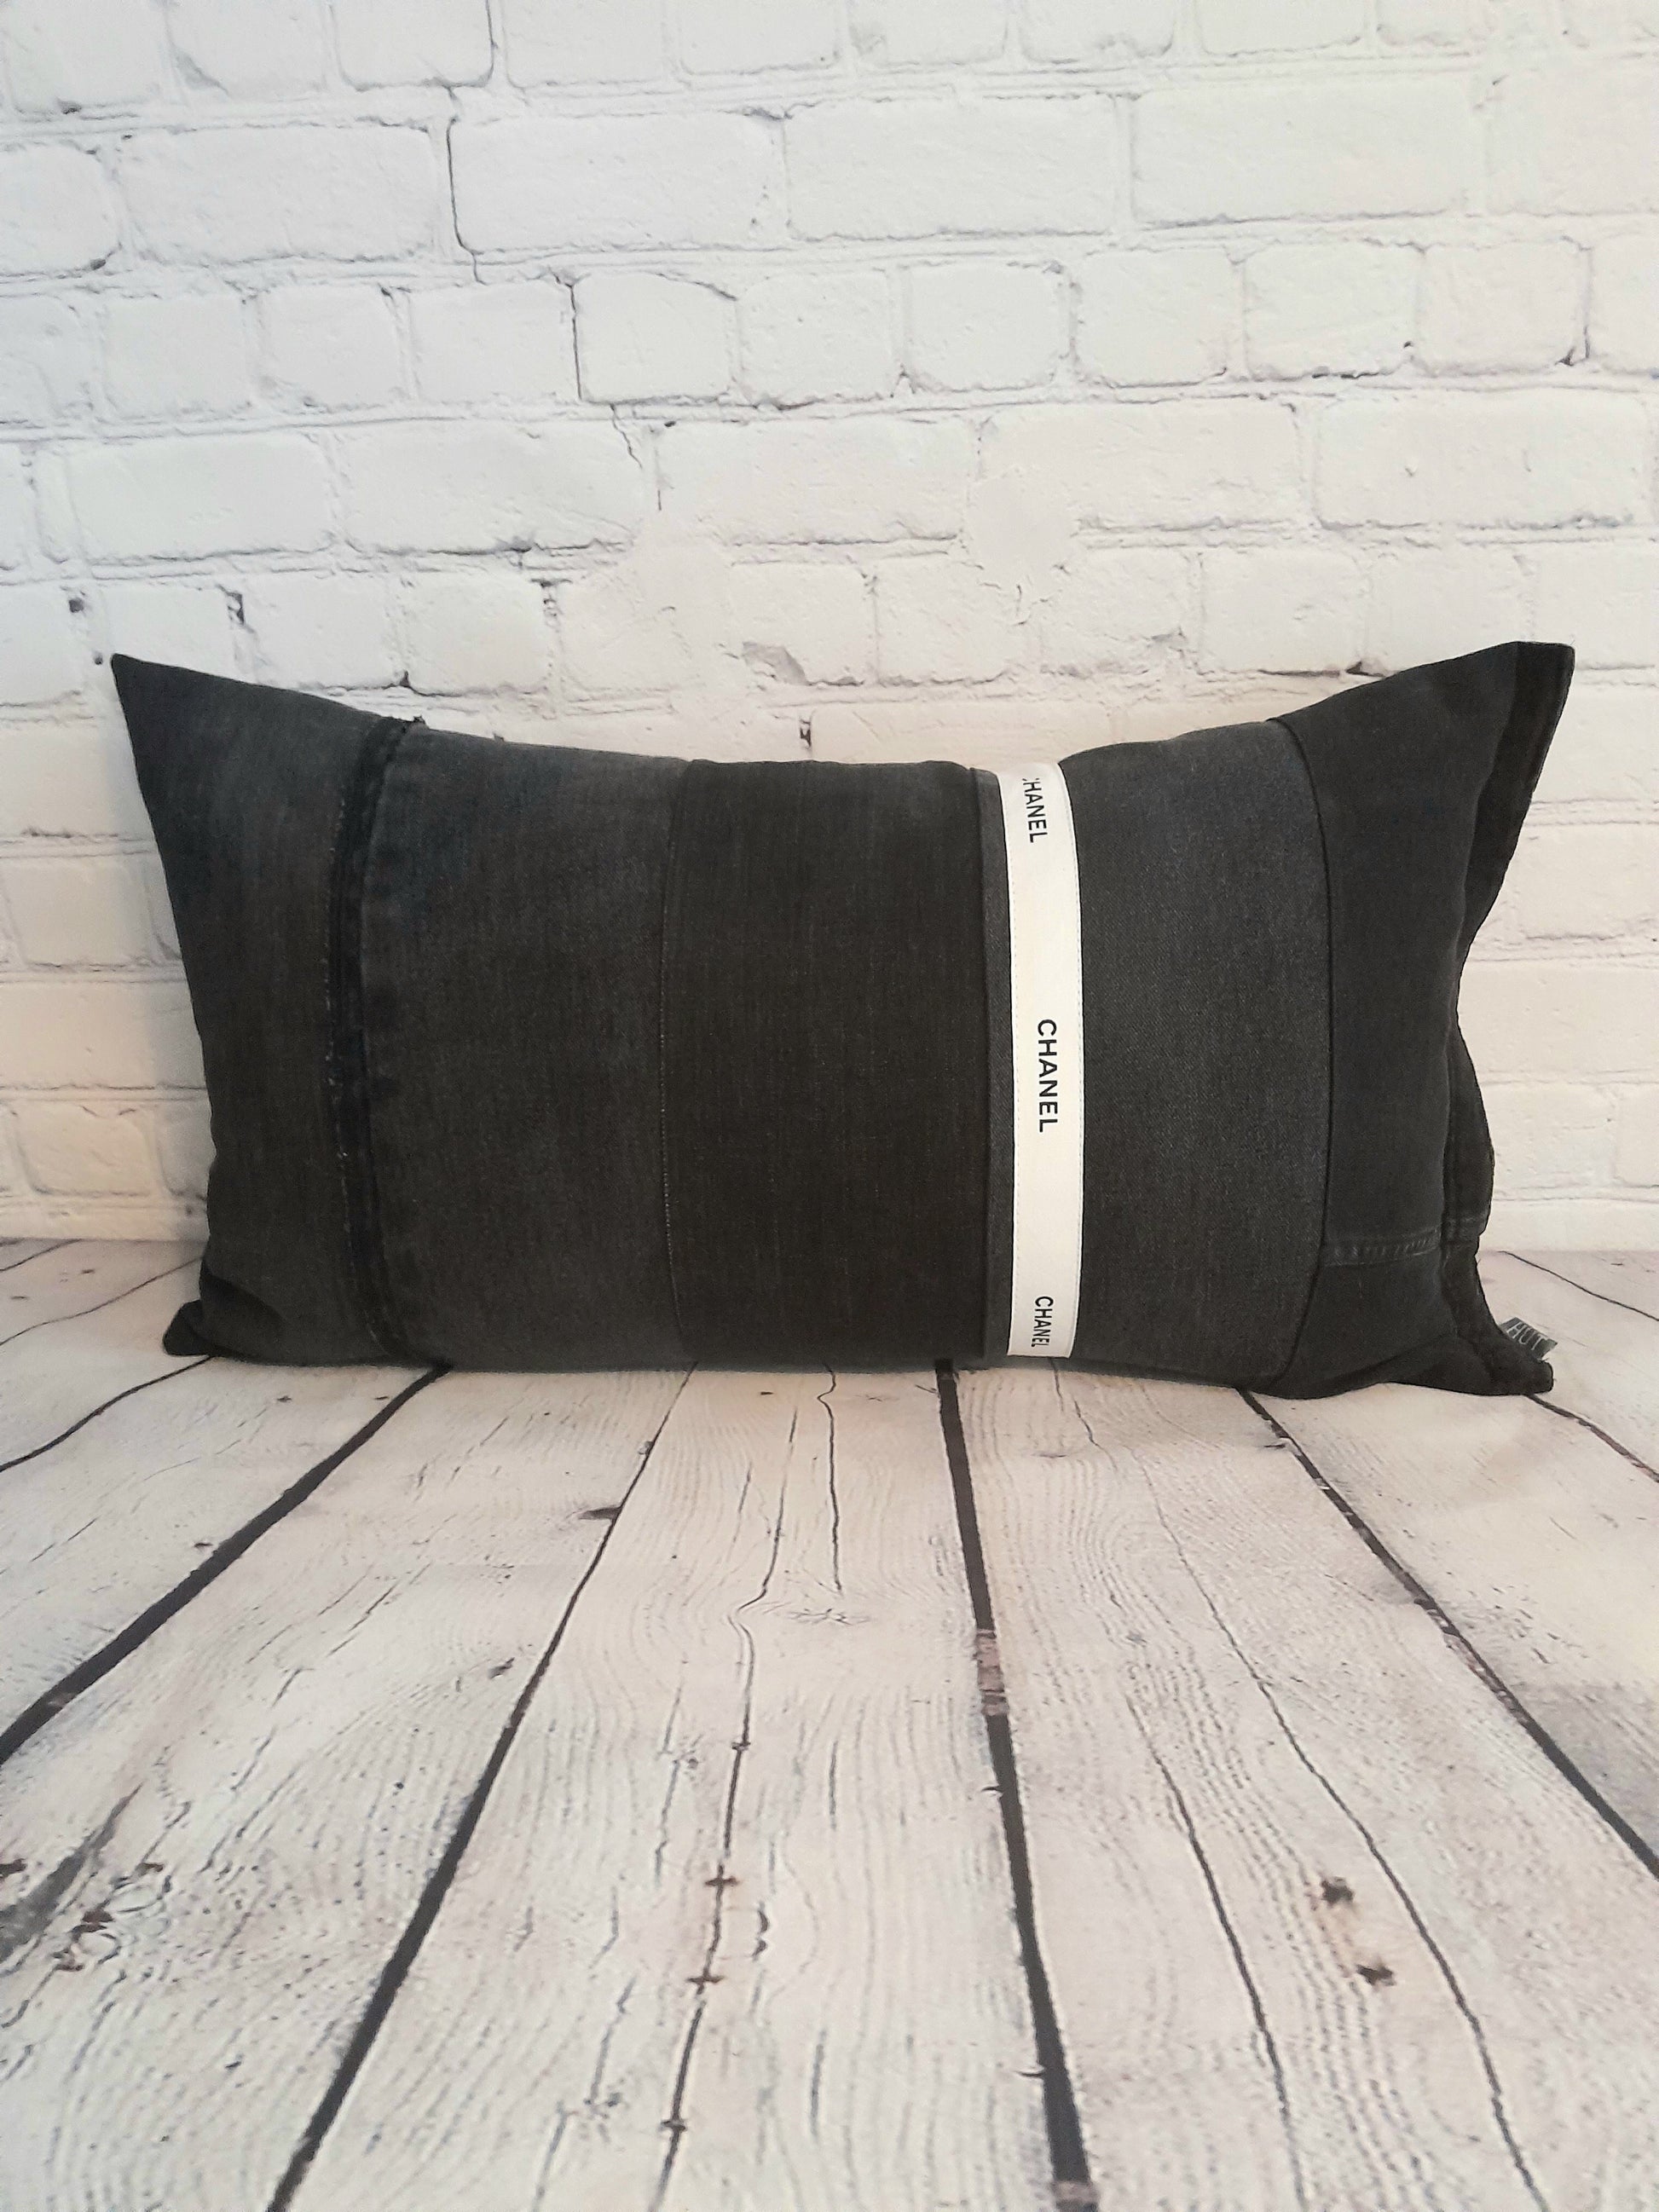 Black patchwork denim bolster cushion pillow with black and white Chanel trim.